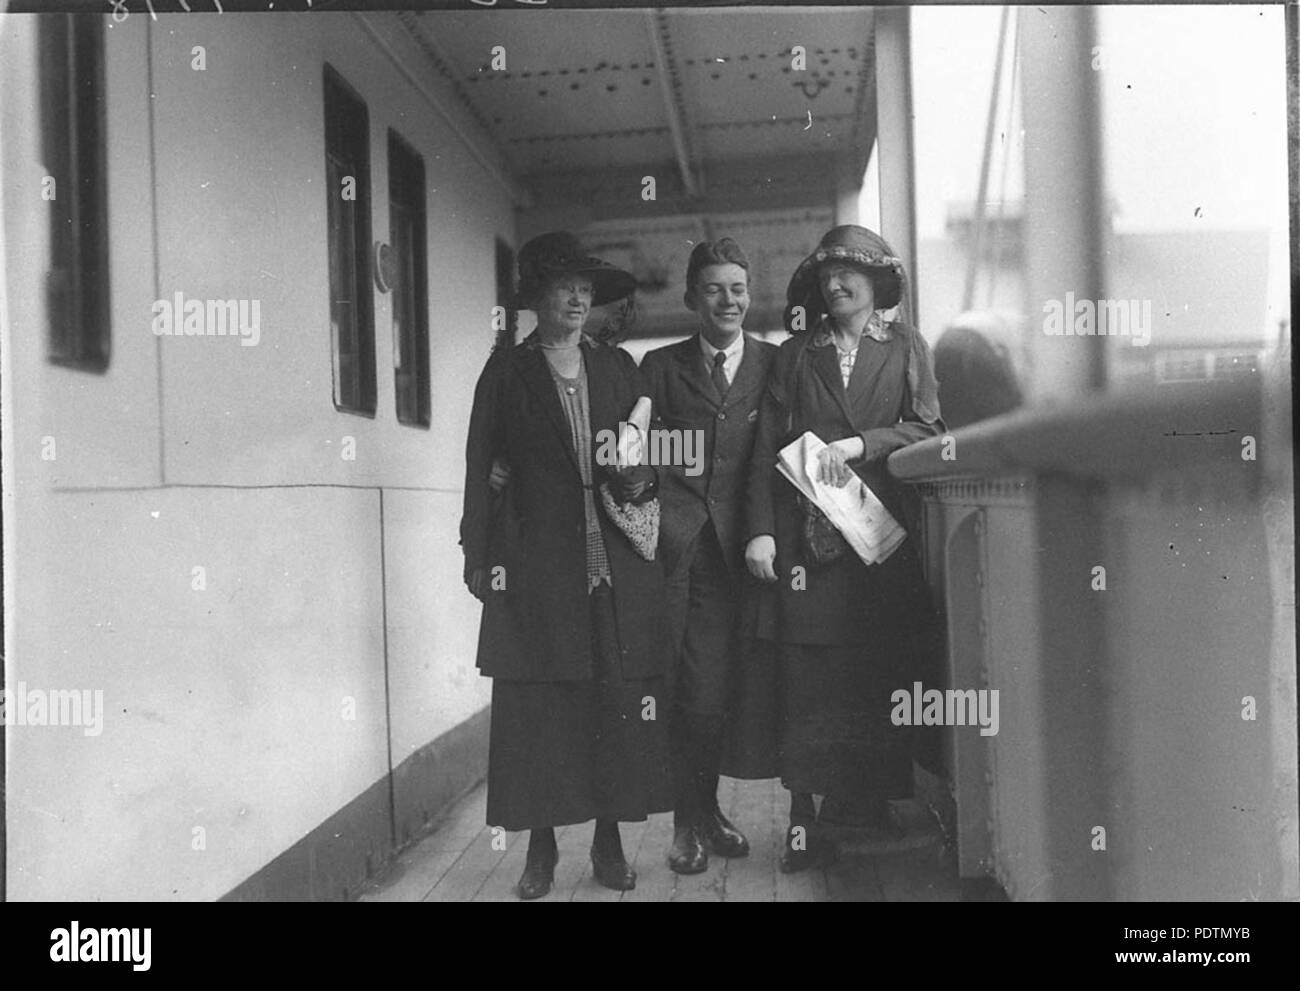 191 SLNSW 8638 A shipboard picture of Miss Elizabeth Neate left and Mrs Florence Messenger both of Glenelg South Australia with young man Stock Photo